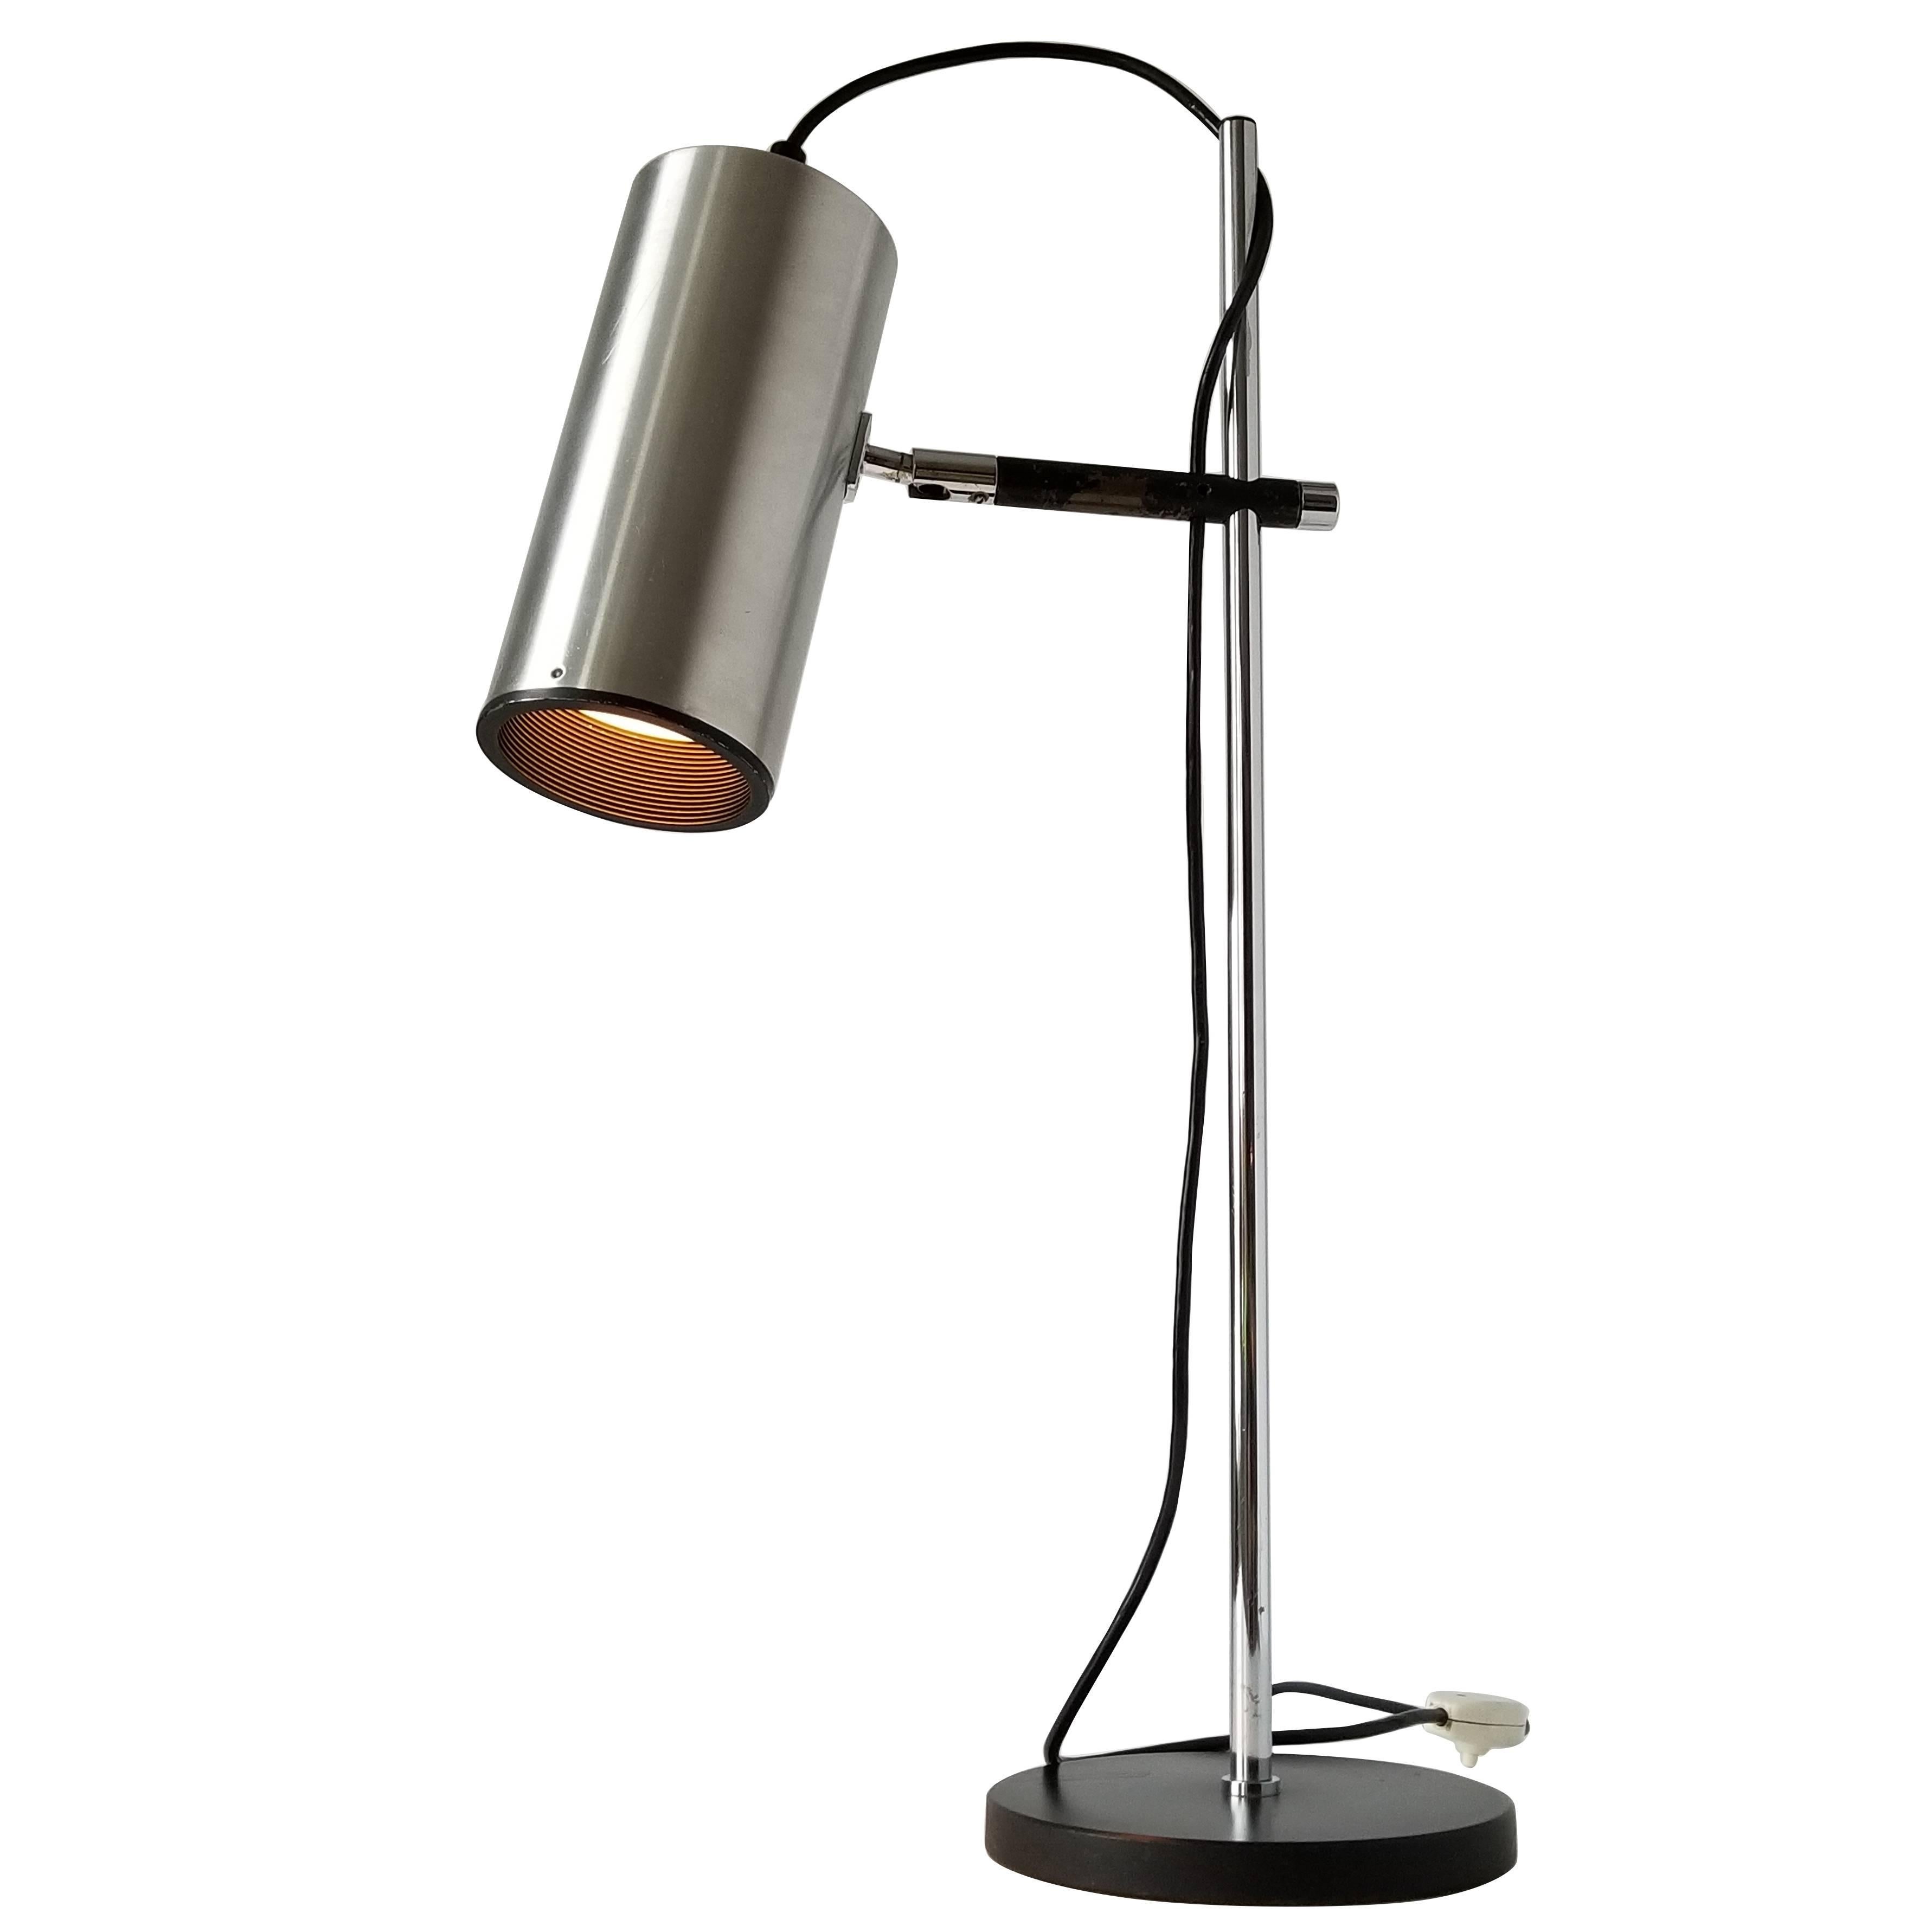 Maria Pergay Table Lamp with Stainless Steel  Shade, 1968 , France